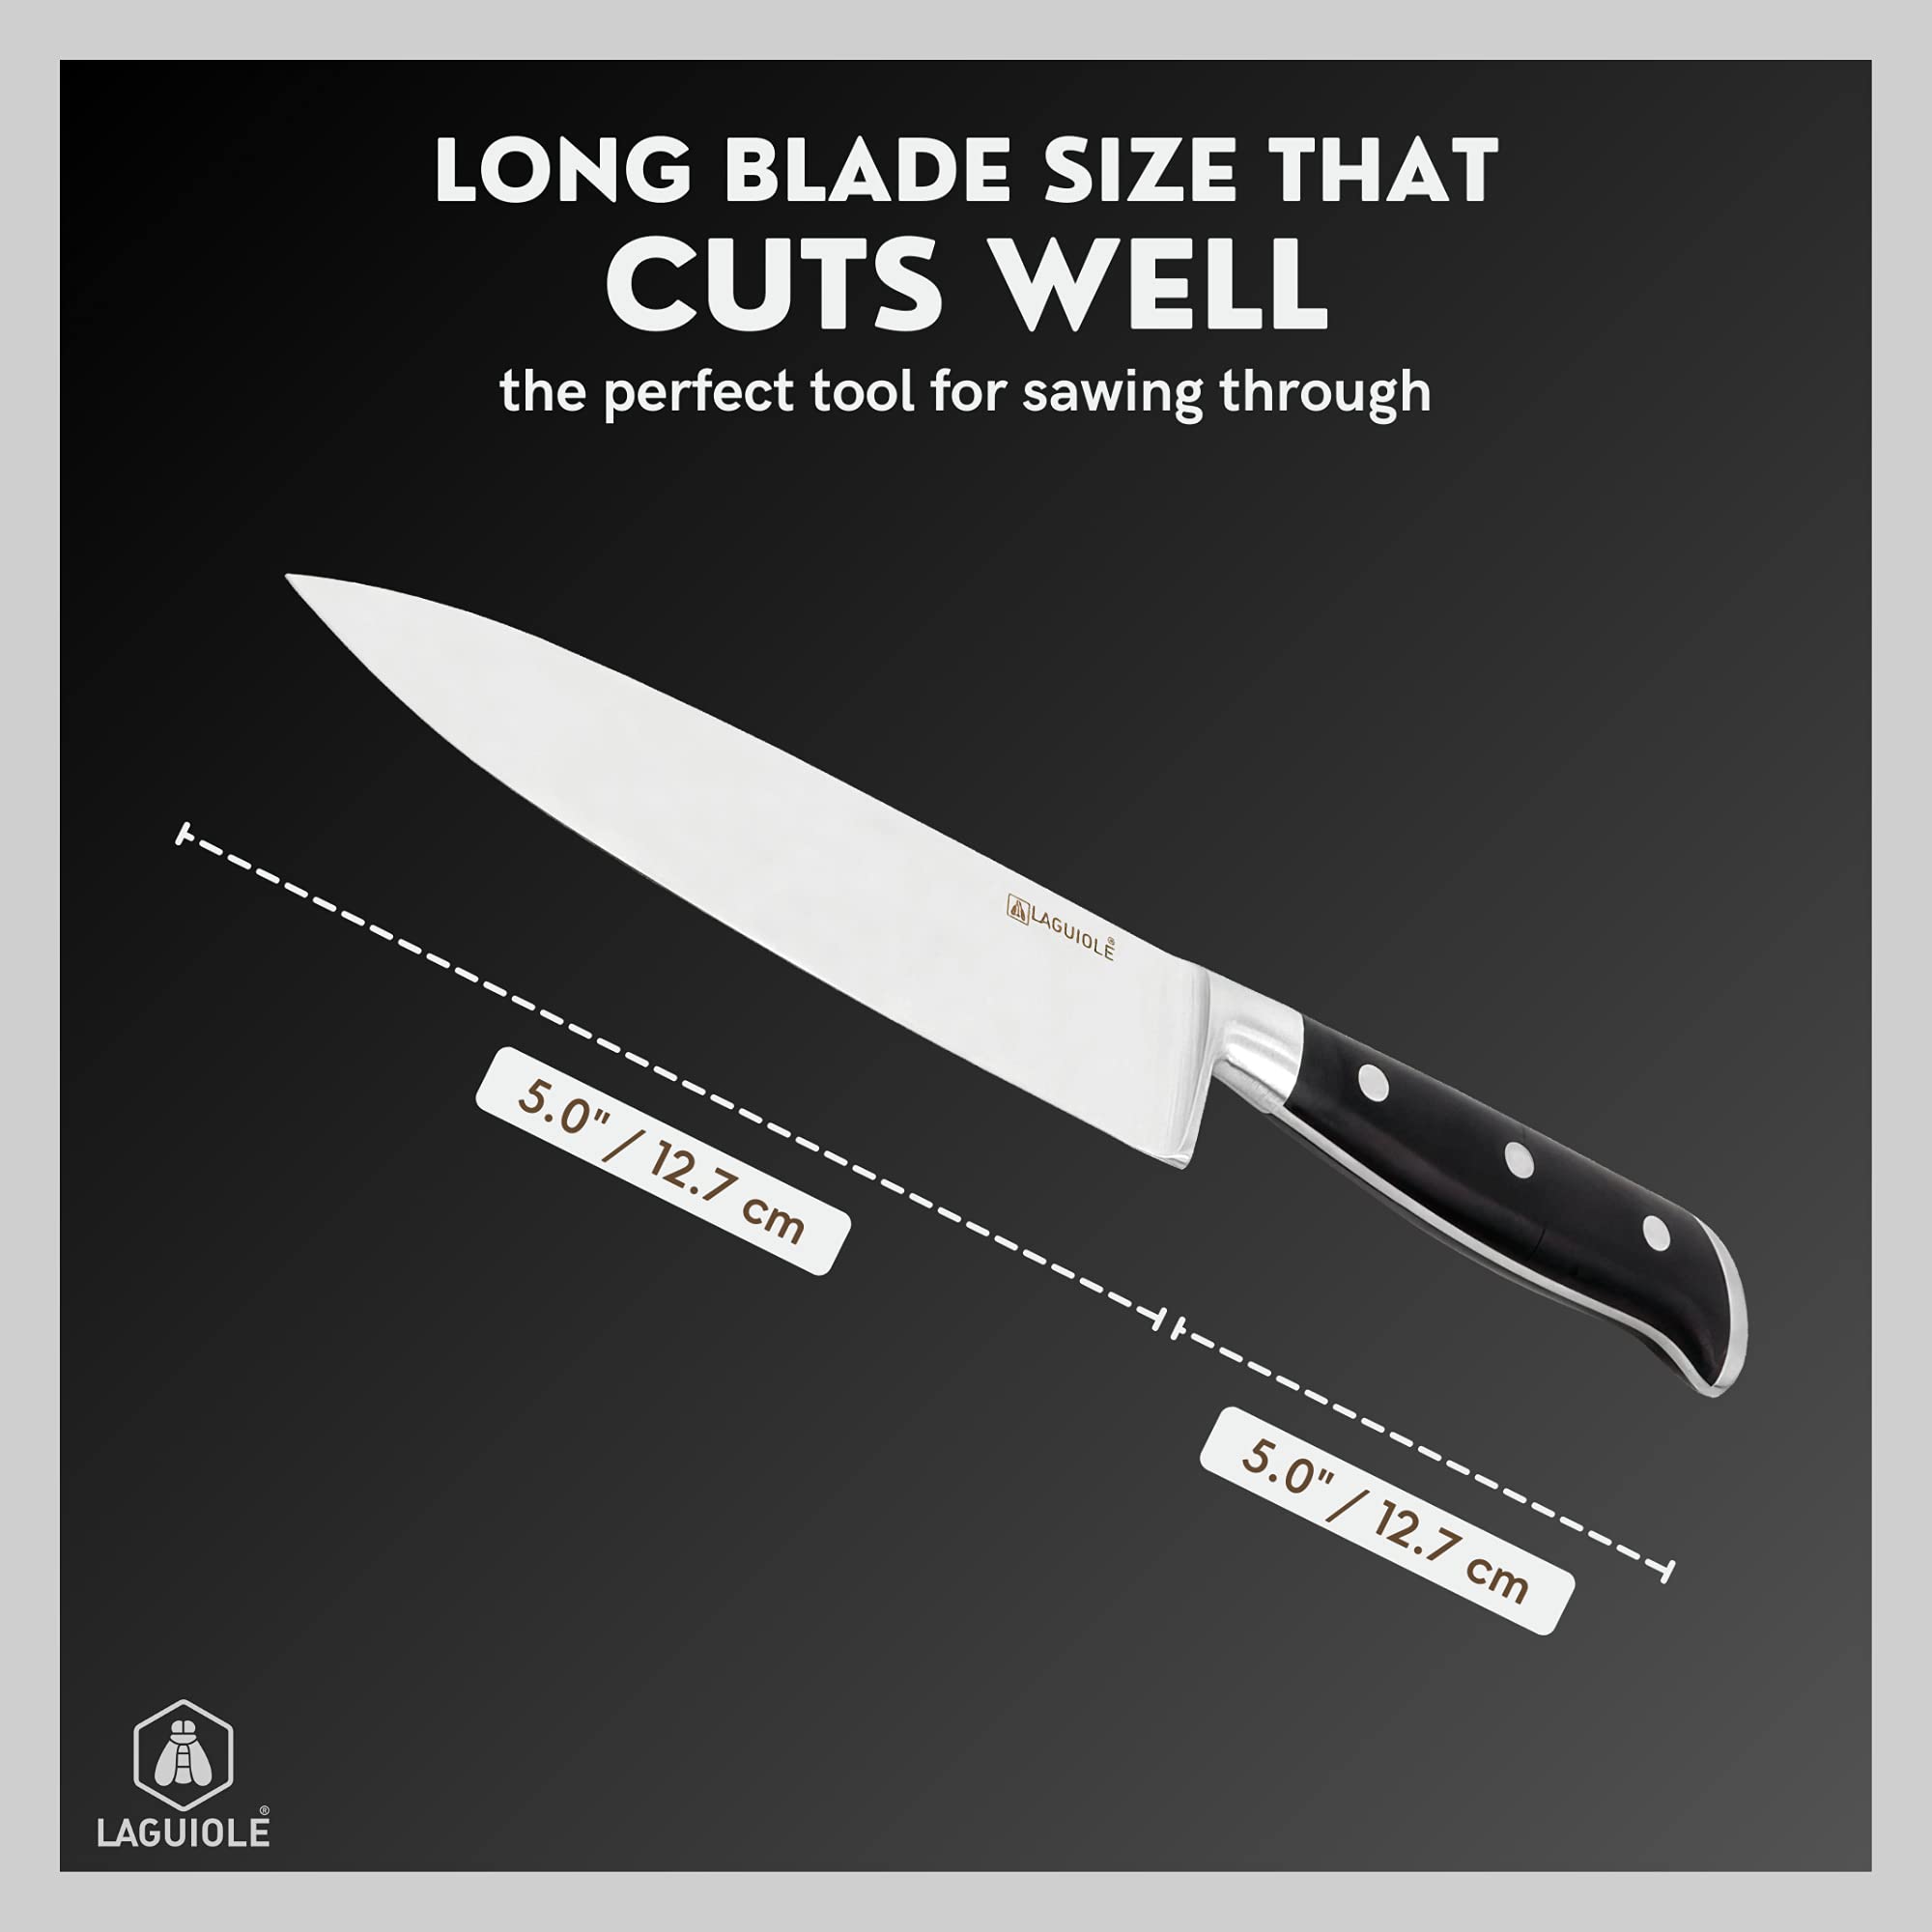 LAGUIOLE 8-Inch Professional Chef Knife - Stainless Steel Kitchen Knife with Ergonomic Handle - Effortlessly Sharp & Easy to Sharpen - Best for Cutting, Chopping & Slicing Meats, Vegetables & Fruits